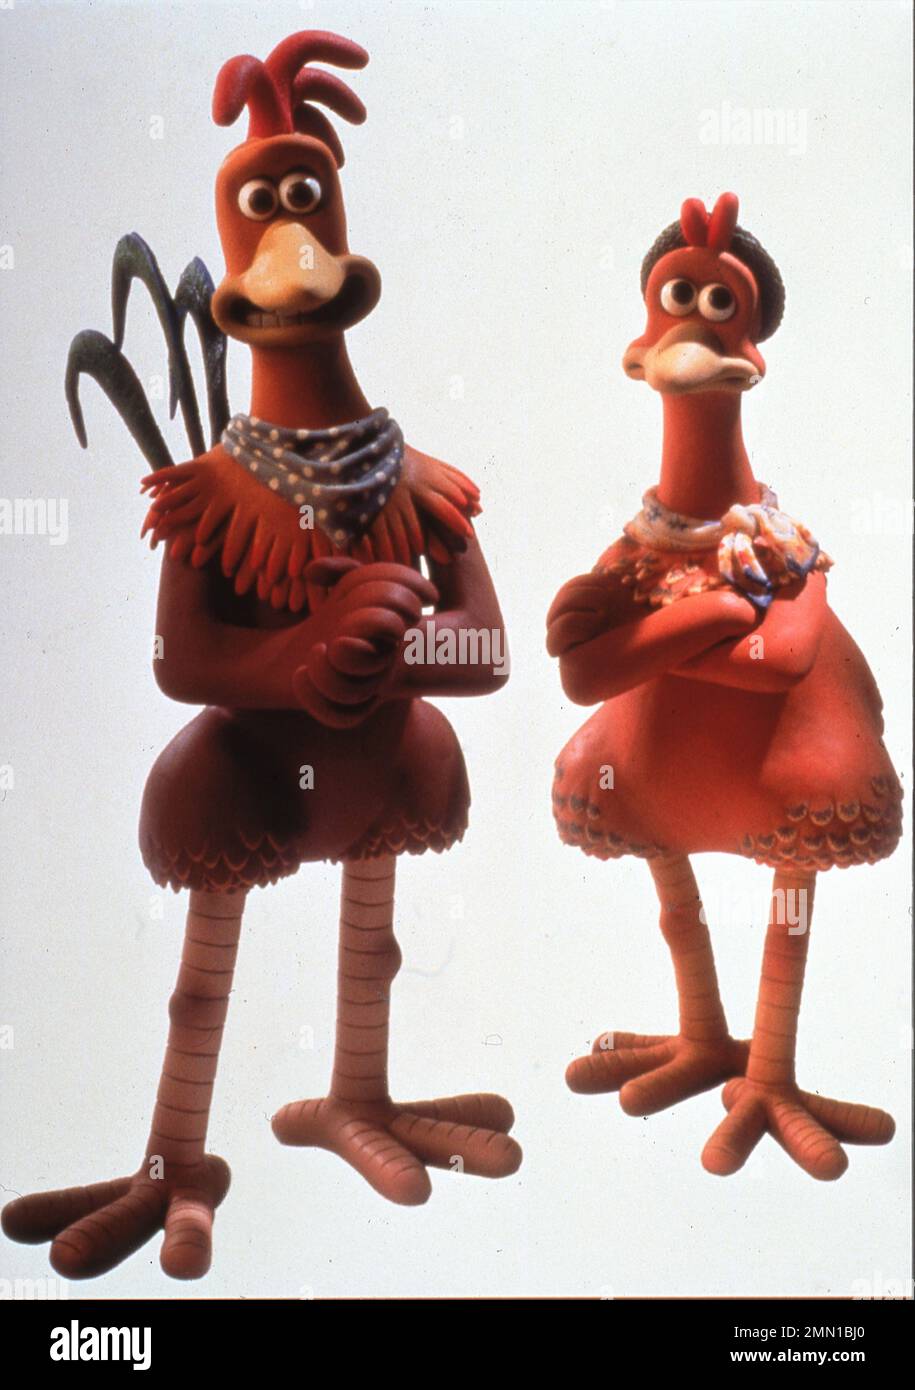 ROCKY (voiced by MEL GIBSON) and GINGER (voiced by JULIA SAWALHA) in CHICKEN RUN (2000) directors / producers / original story PETER LORD and NICK PARK UK-France-USA co-production Aardman Animations / Dreamworks Animation / Pathe / Allied Filmakers / Dreamworks Pictures Stock Photo